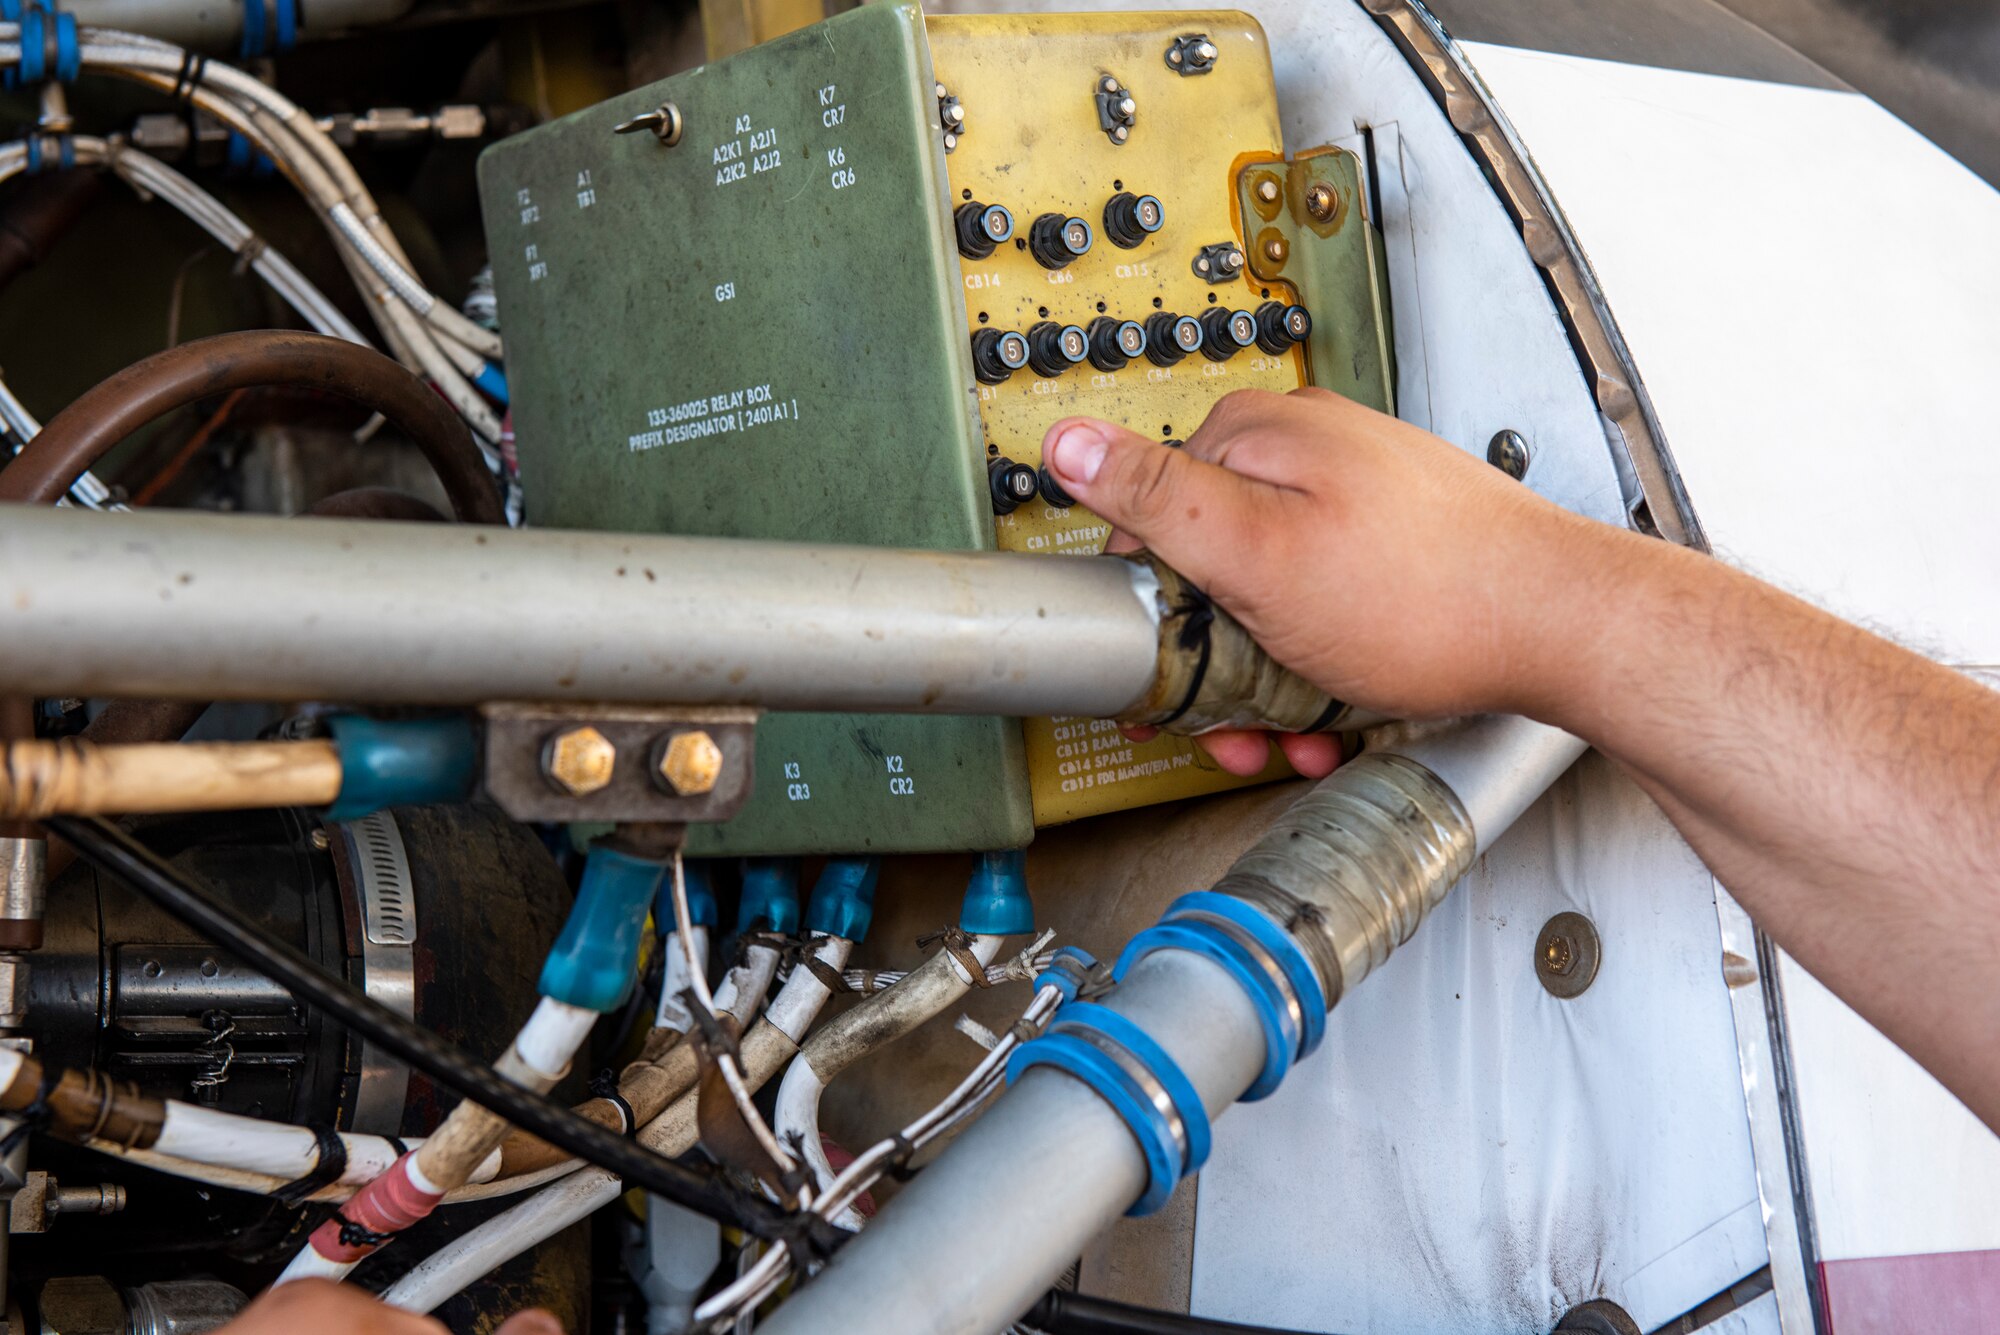 Jerry Martinez, 47th 47th Flying Maintenance Directorate aircraft mechanic, examines the engine of a Texan II T-6 aircraft to ensure it is suitable for flight, at Laughlin Air Force Base, Texas on Sept. 8, 2021. National Hispanic Heritage Month is a period from September 15 to October 15 in the United States for recognizing the contributions and influence of Hispanic Americans to the history, culture, and achievements of the United States.